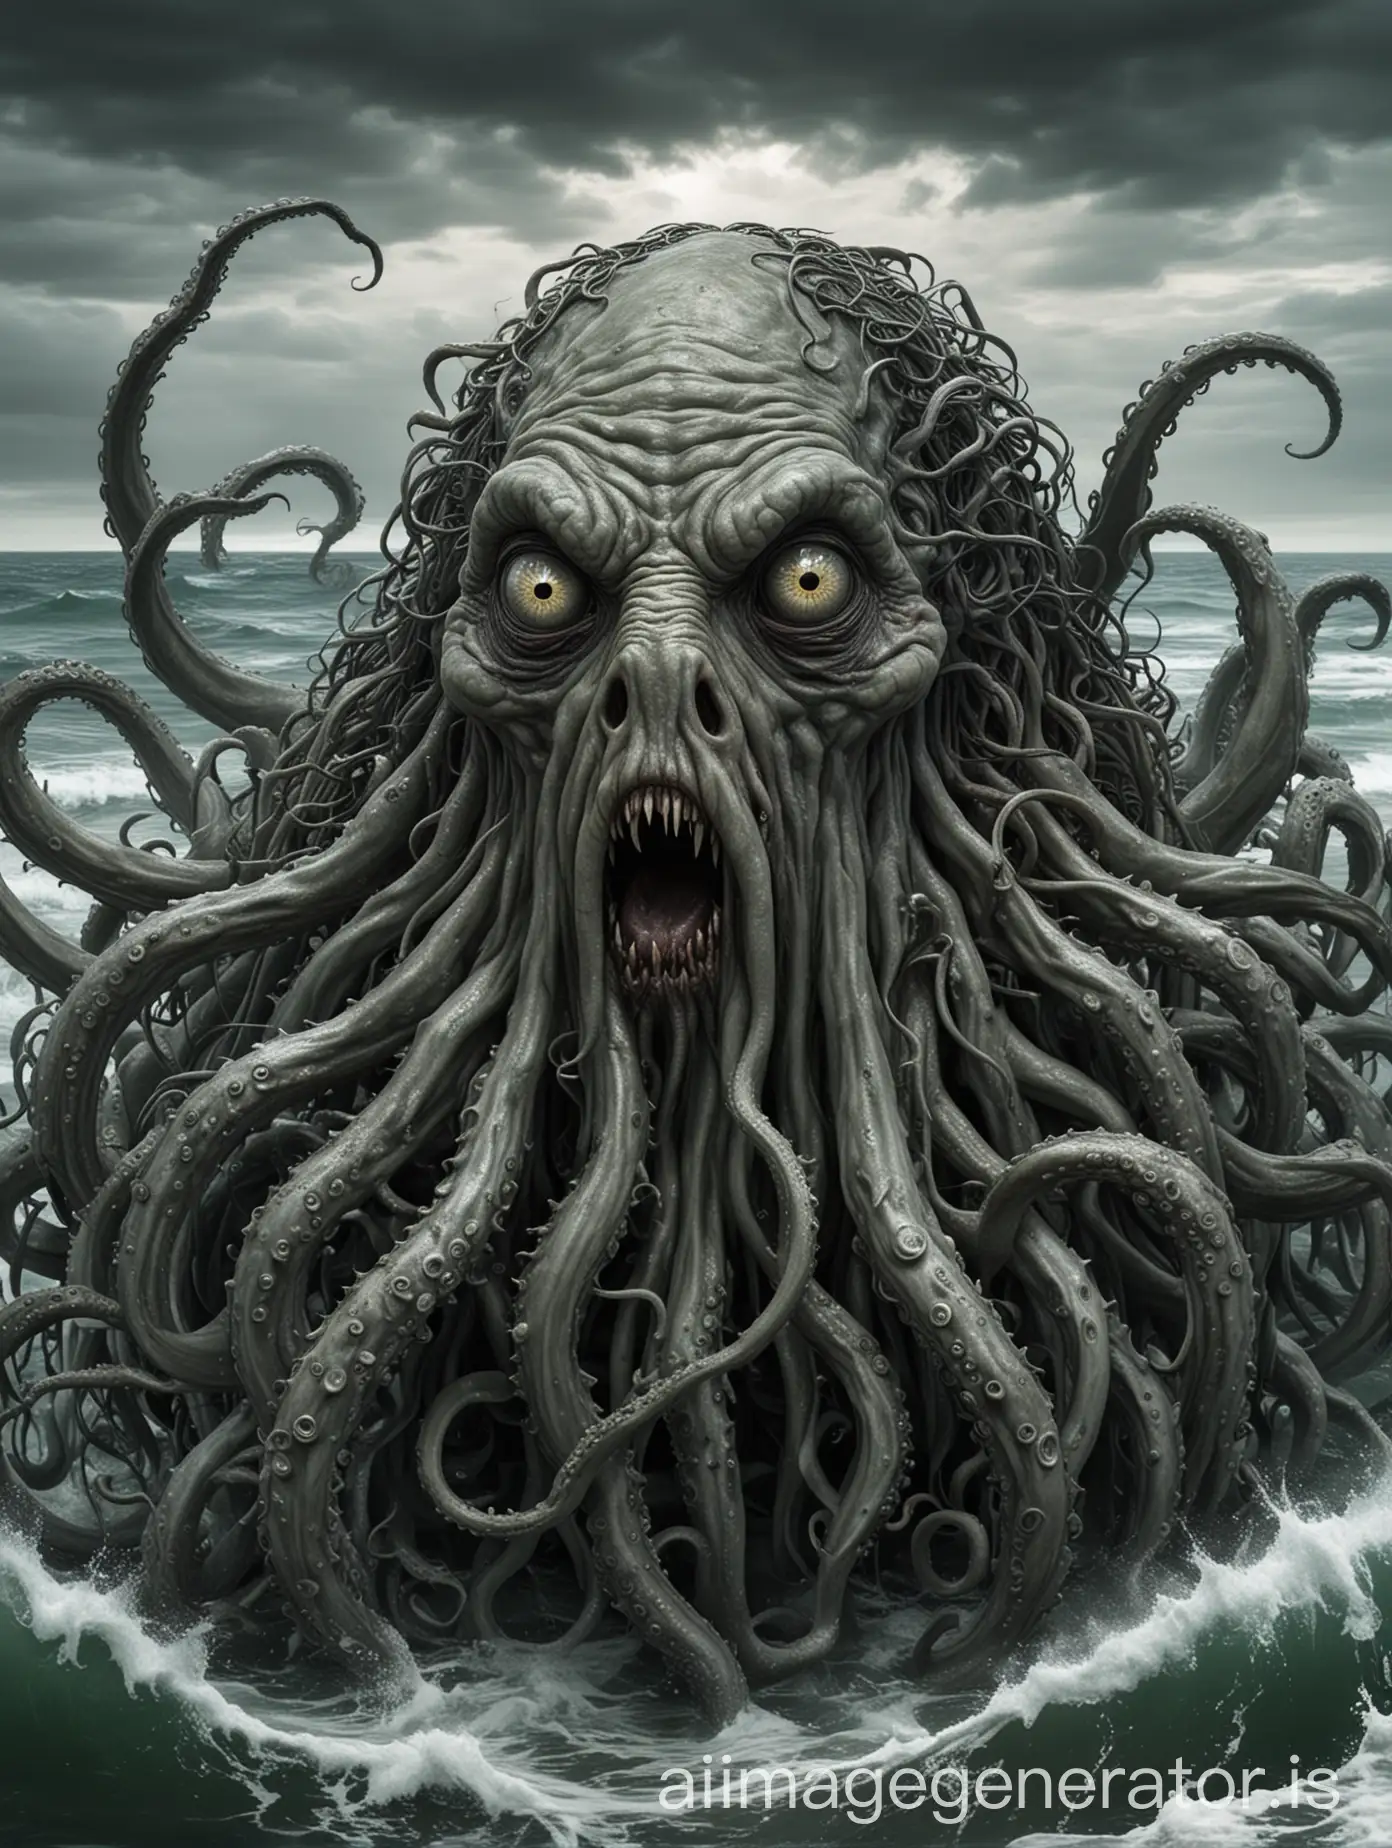 H.P Lovecraft monster, lots of tentacles. several eyes, gray skin a large mouth full of sharp teeth emerging from the sea